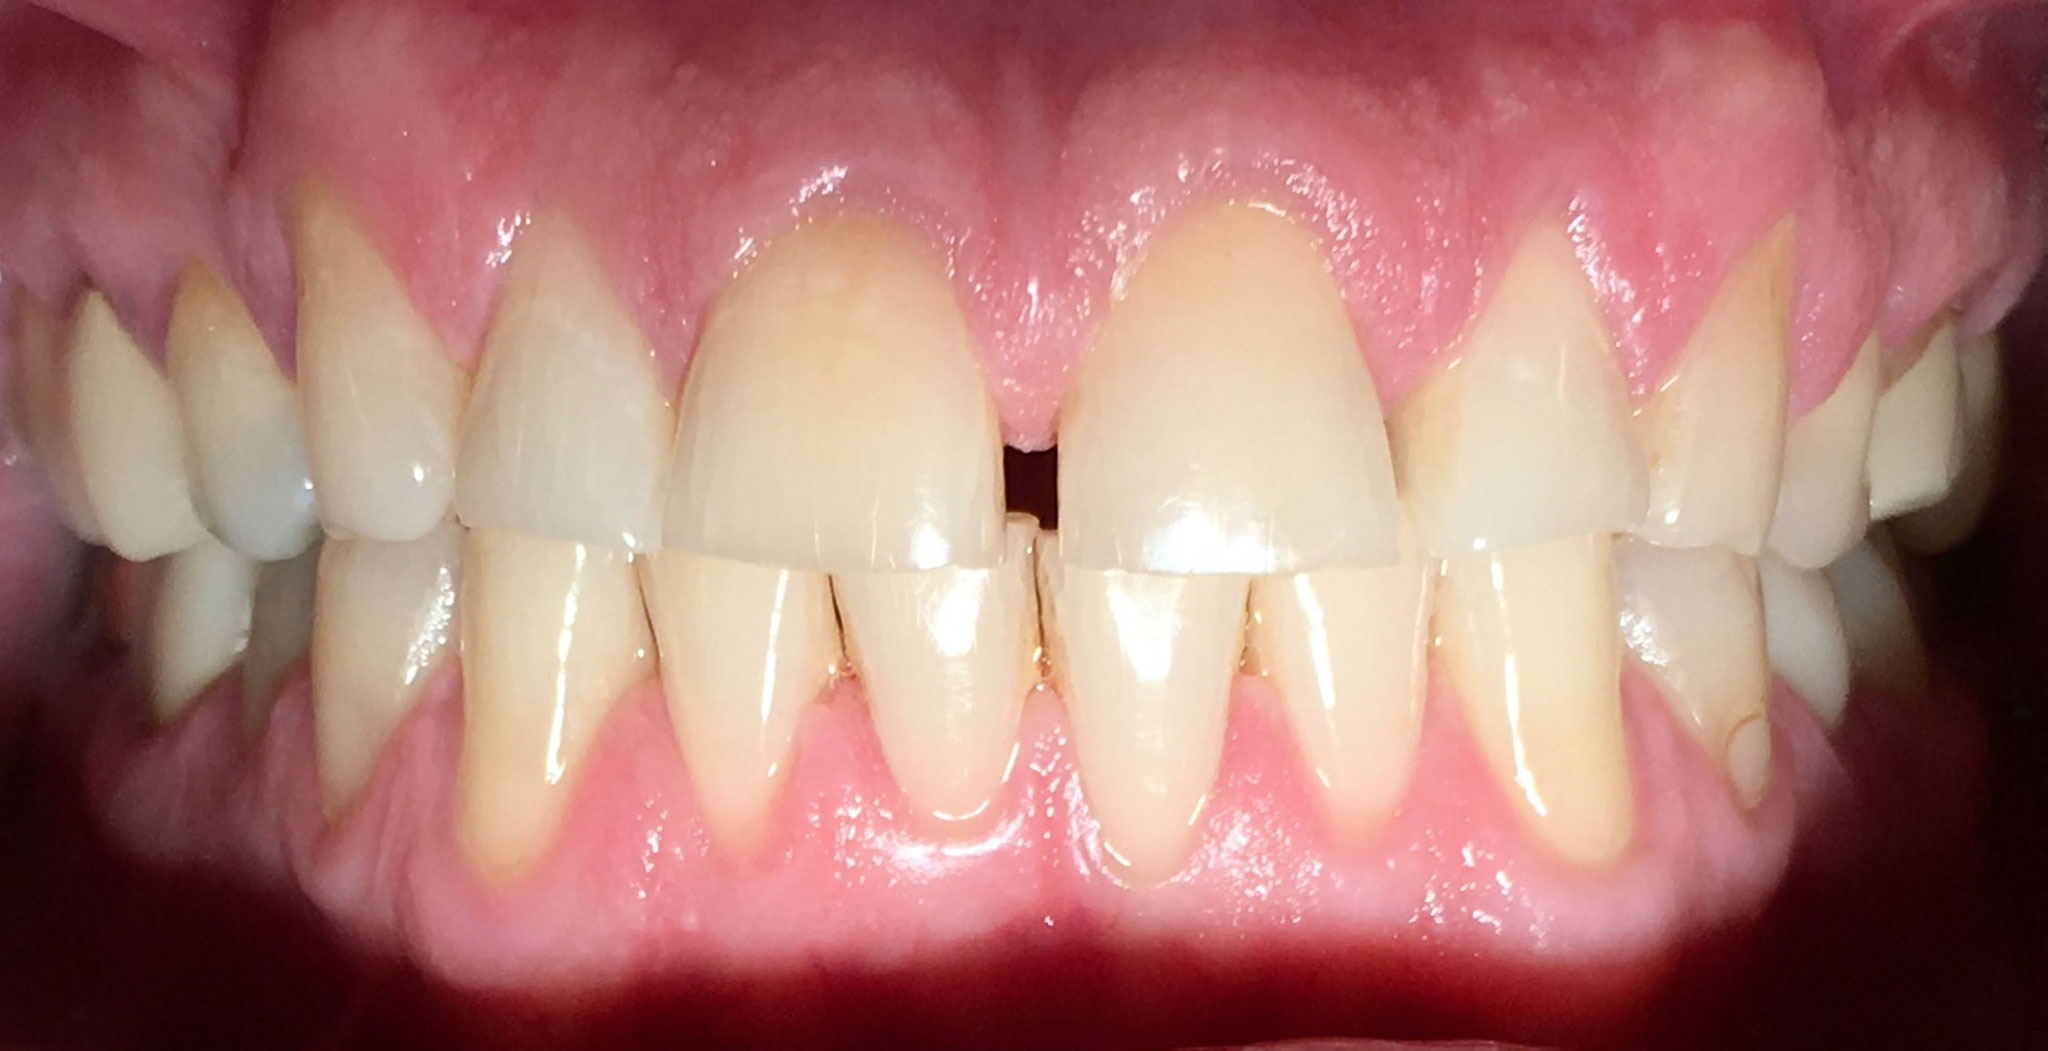 BEFORE | Cosmetic veneers. Patient had severe gapping and wear